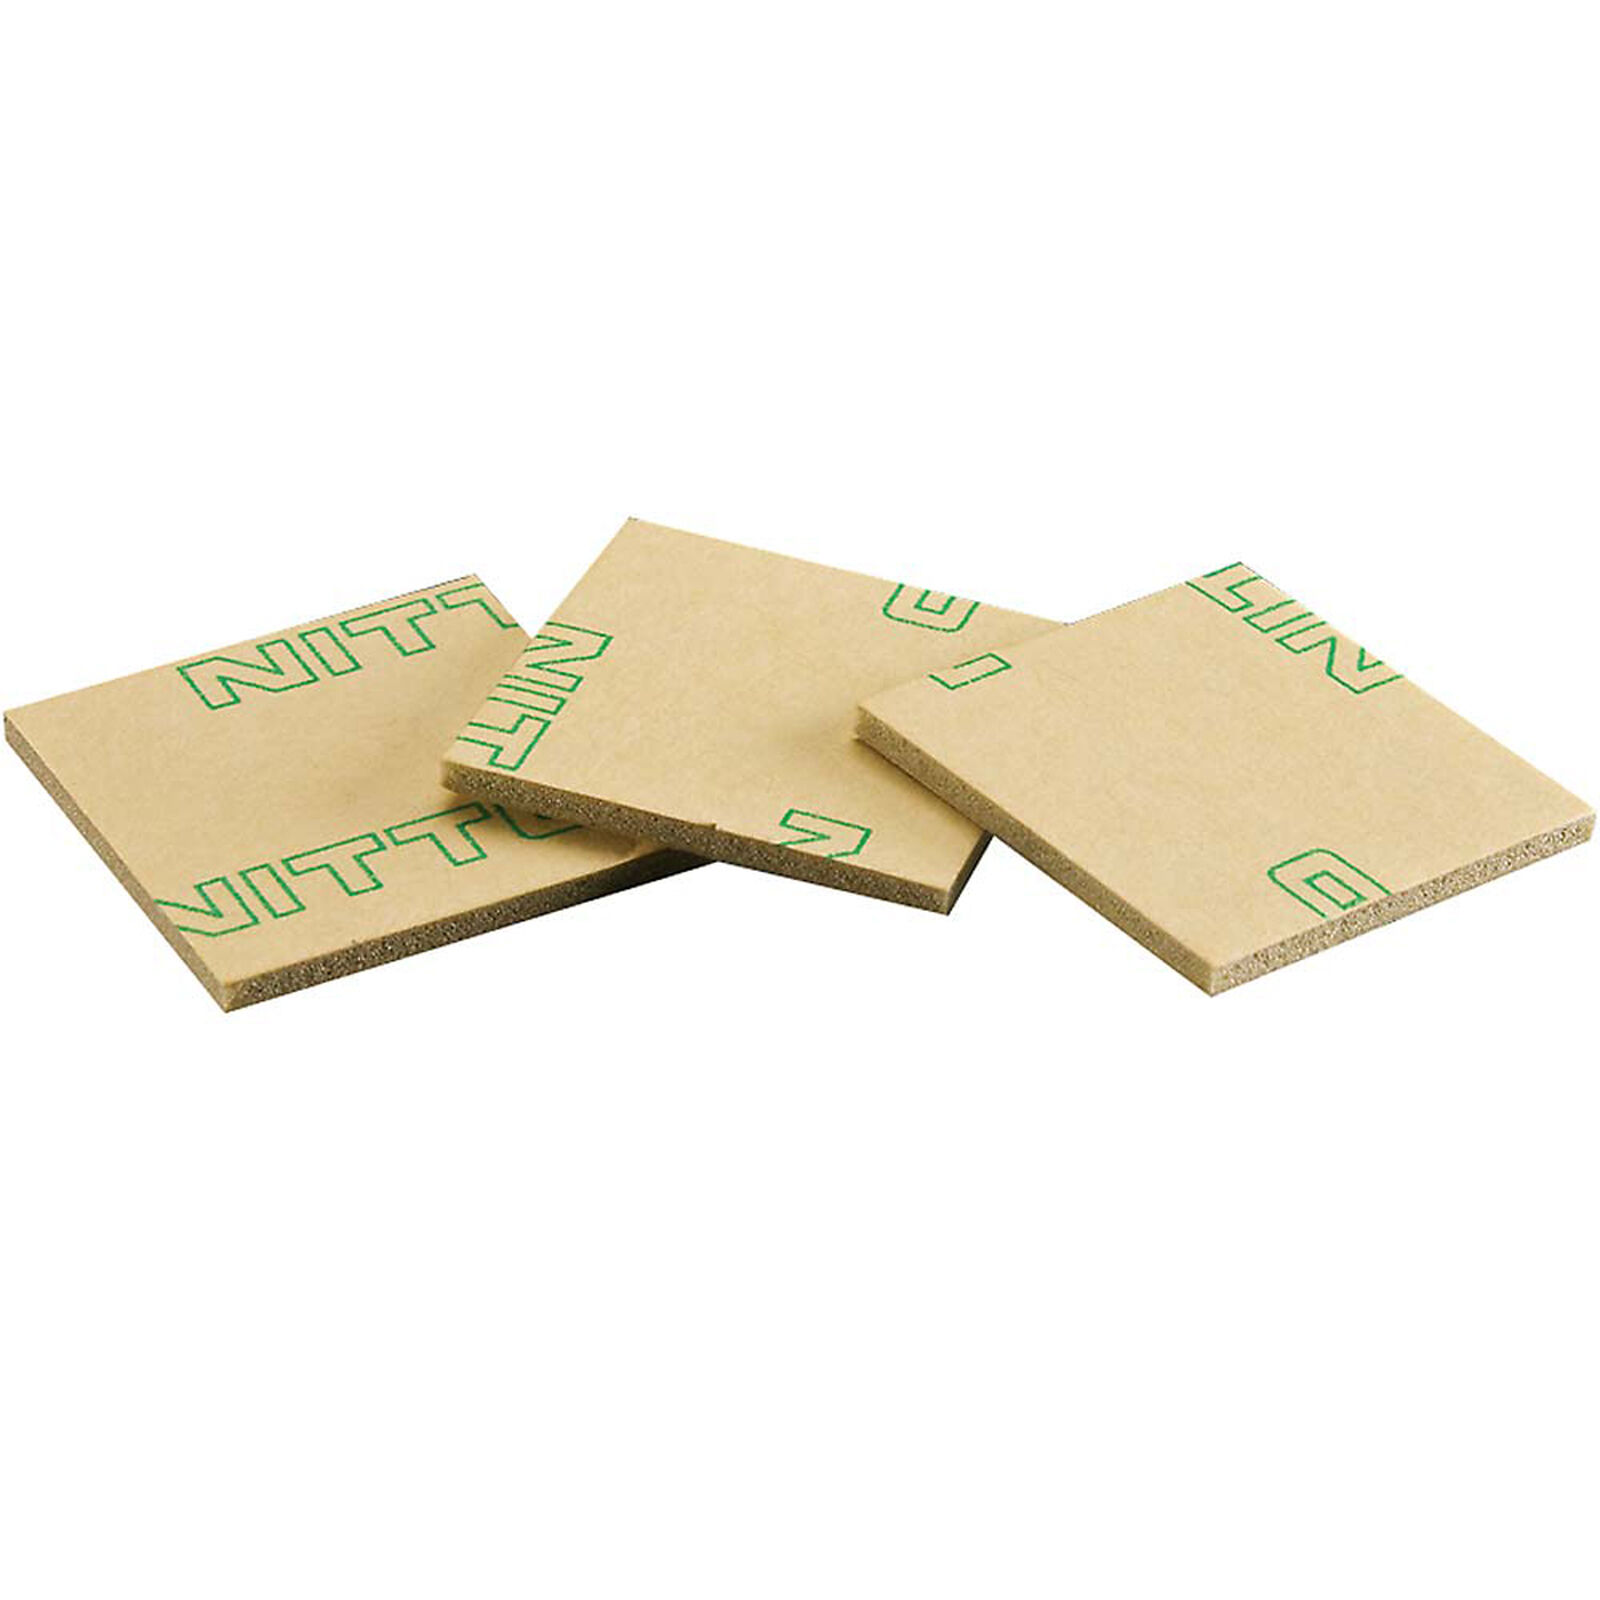 Gyro Double Sided Foam Mounting Pads 30x30mm (3)